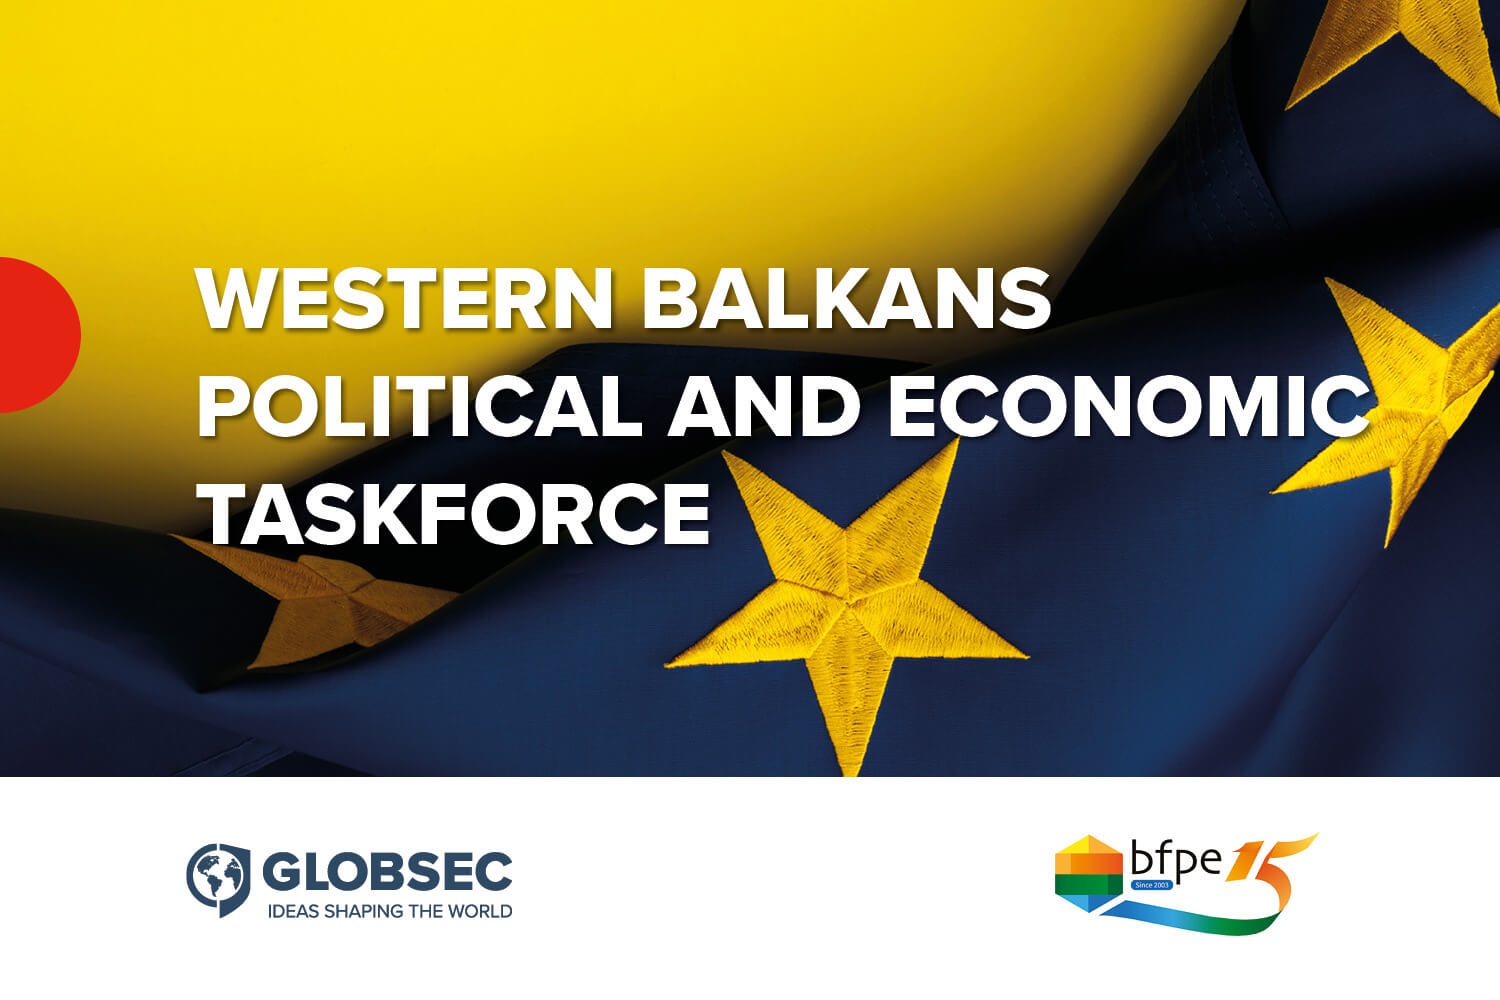 GLOBSEC and the Belgrade Fund for Political Excellence launch the Western Balkans Political and Economic Task Force